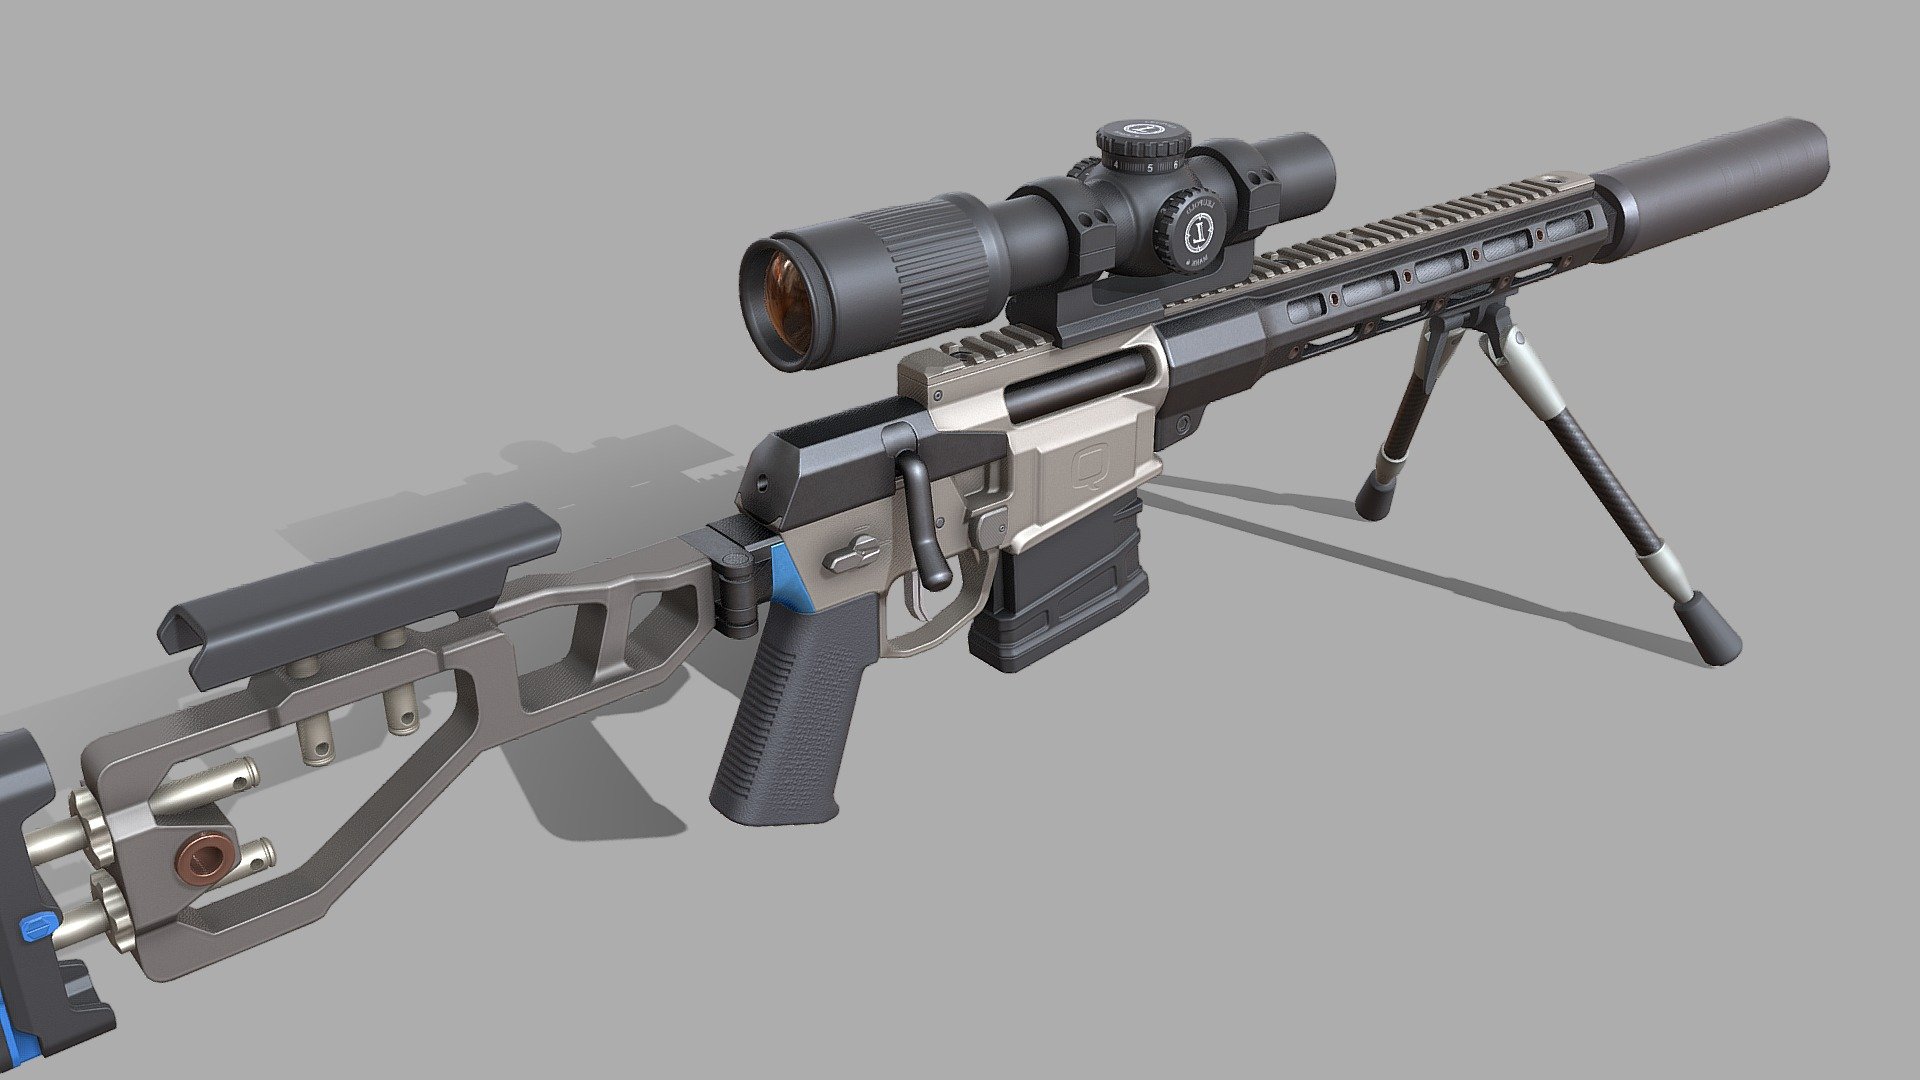 this is high quality game ready weapon model with 4K PBR textures and its ready for use. model comes with: 4k textures (5 uv sets) OBJ and FBX files. 

-Detailed low poly model. Clear topology, only tris and quads

-MODEL ATTACHMENTS: 1. Leupold mark 6 scope 2. jumbo shrimp suppressor 3. Q Cherry Bomb Quickie Muzzle Brake 4. Bipod

-THIS MODEL IS GAME READY and also can be used in cinematic films and movies.

-Can be used in all current game engines such a Unity 3d, CryEngine 5, Unreal Engine 4 etc. -Rendered in Marmoset 3.

-File contains 5 sets of 4K PBR textures : roughness, metallnes, normal, AO map and base color 3d model